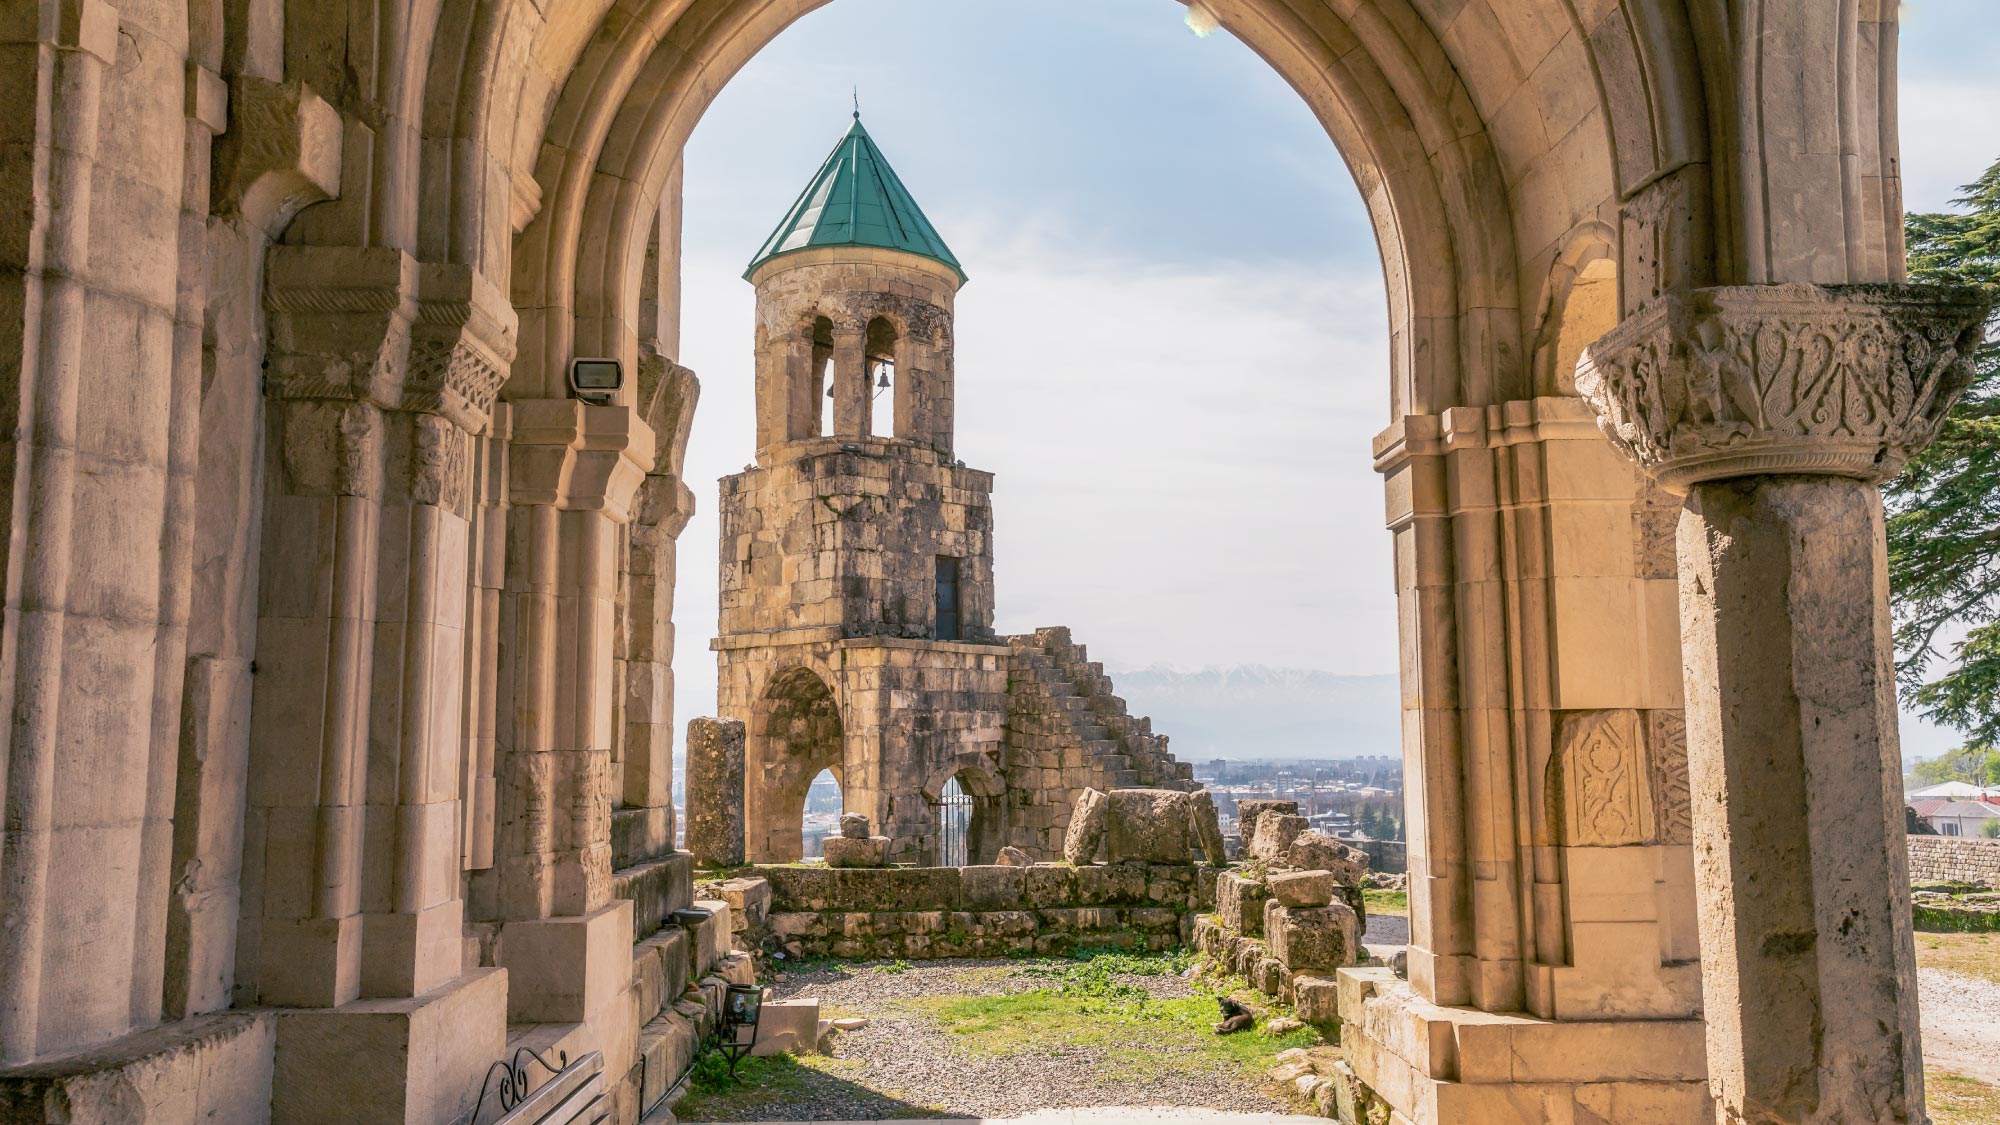 Capture the enchanting beauty of Tbilisi in Georgia, a captivating stop on the journey to Australia spanning 21 countries, tailored for self-flying pilots. Immerse yourself in the rich history, vibrant culture, and stunning architecture of this dynamic city in the heart of the Caucasus.